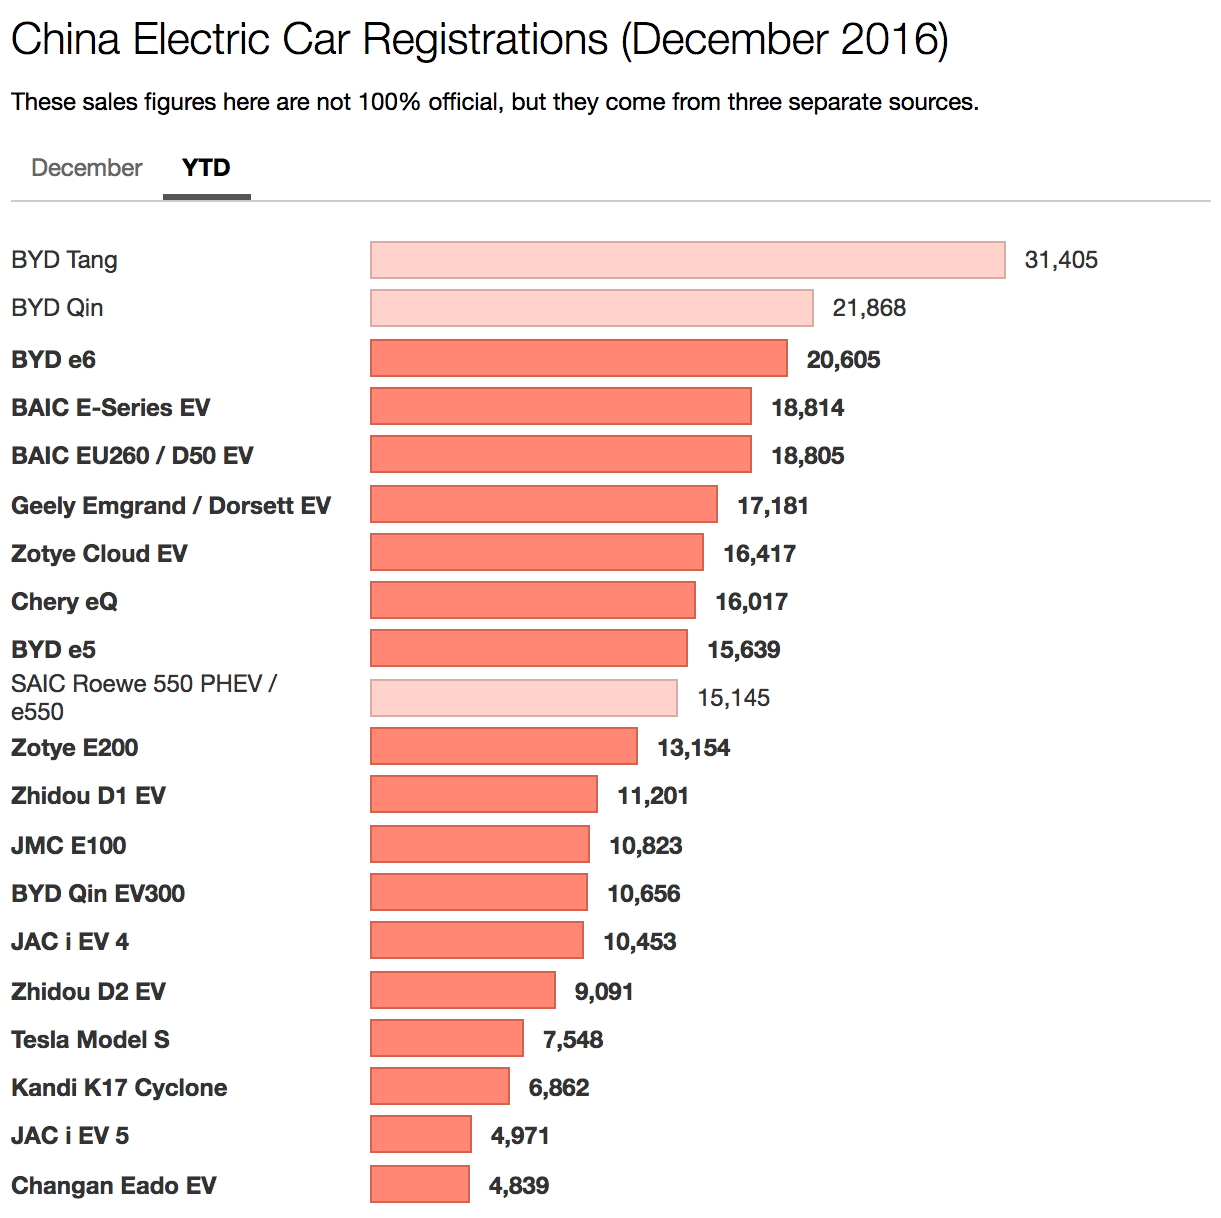 C:\Users\Beatriz\Pictures\China-Electric-Car-Sales-2016-YTD.png